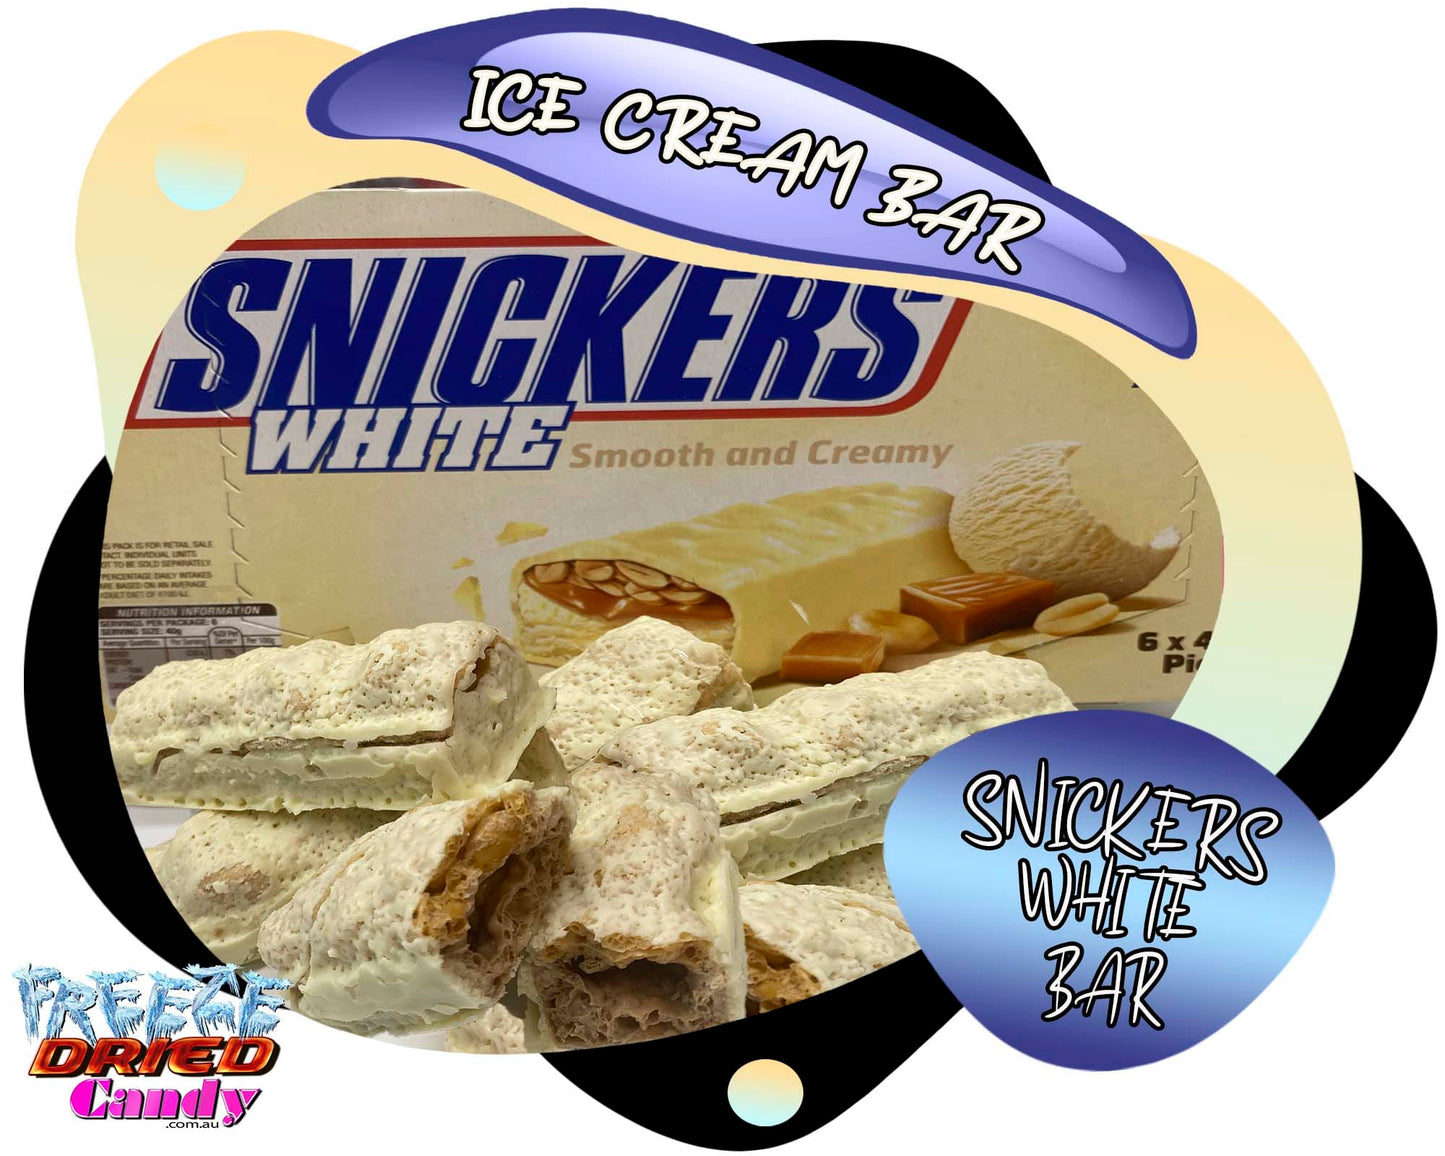 Freeze Dried Ice Cream Snickers Bar  are packed with peanuts, caramel, a creamy centre and coated in white chocolate.   Very moreish. After being freeze dried the ice cream is crunchy, the flavor is intensified and has 0% moisture content-  These are delicious and decadent!